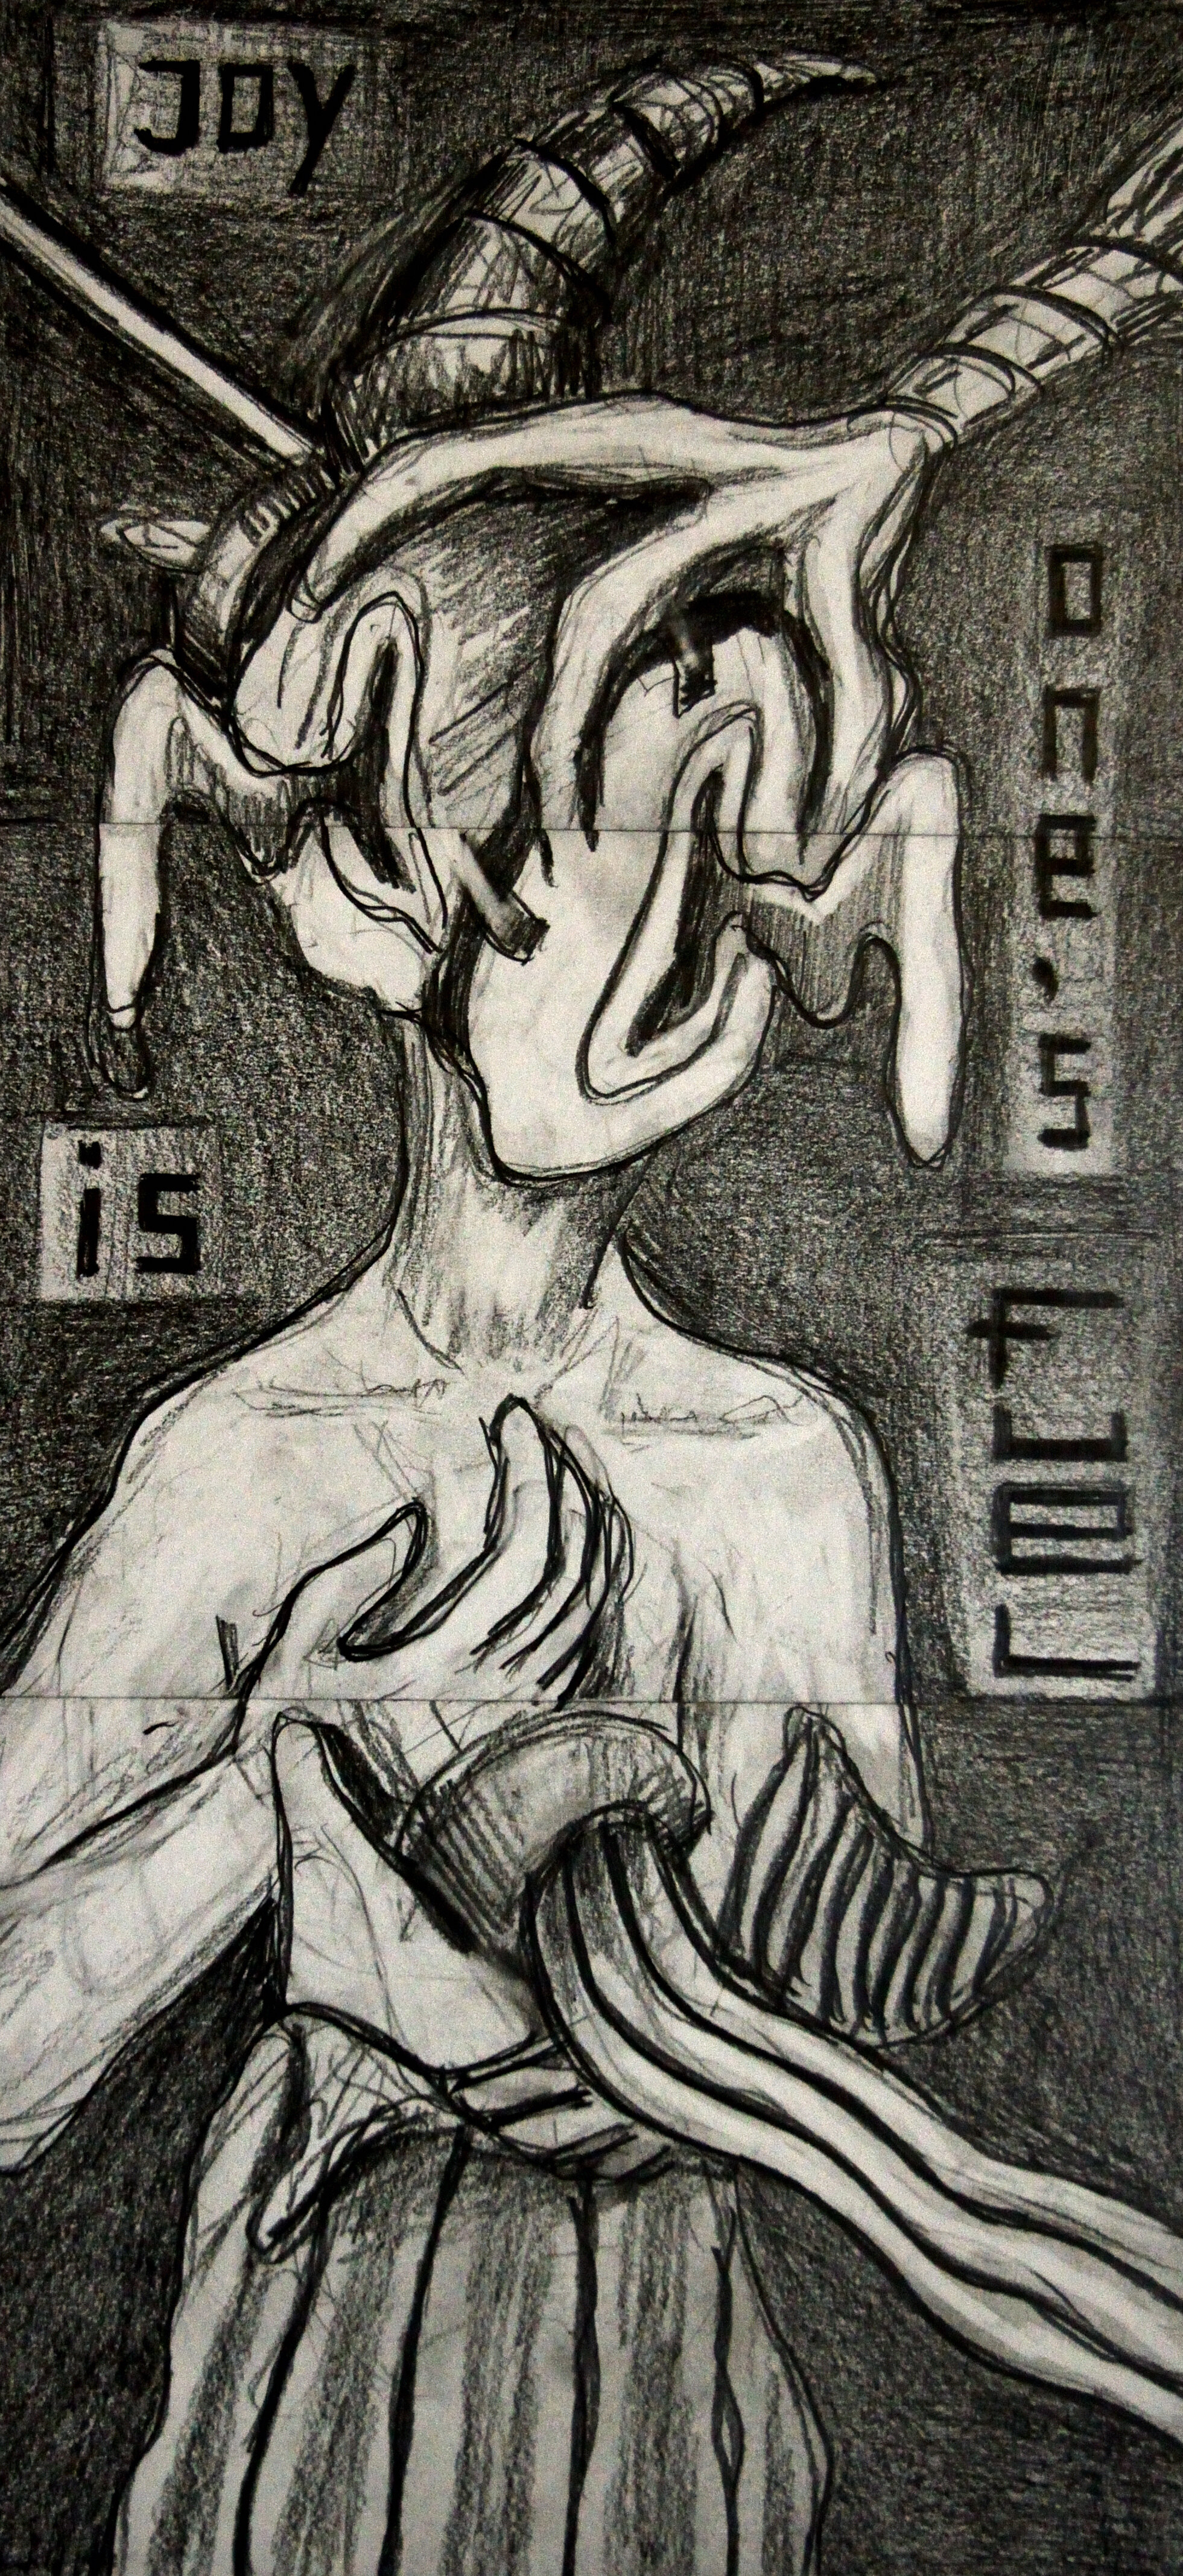 Joy is One's Fuel, pencil on paper, tryptich, 63x30cm